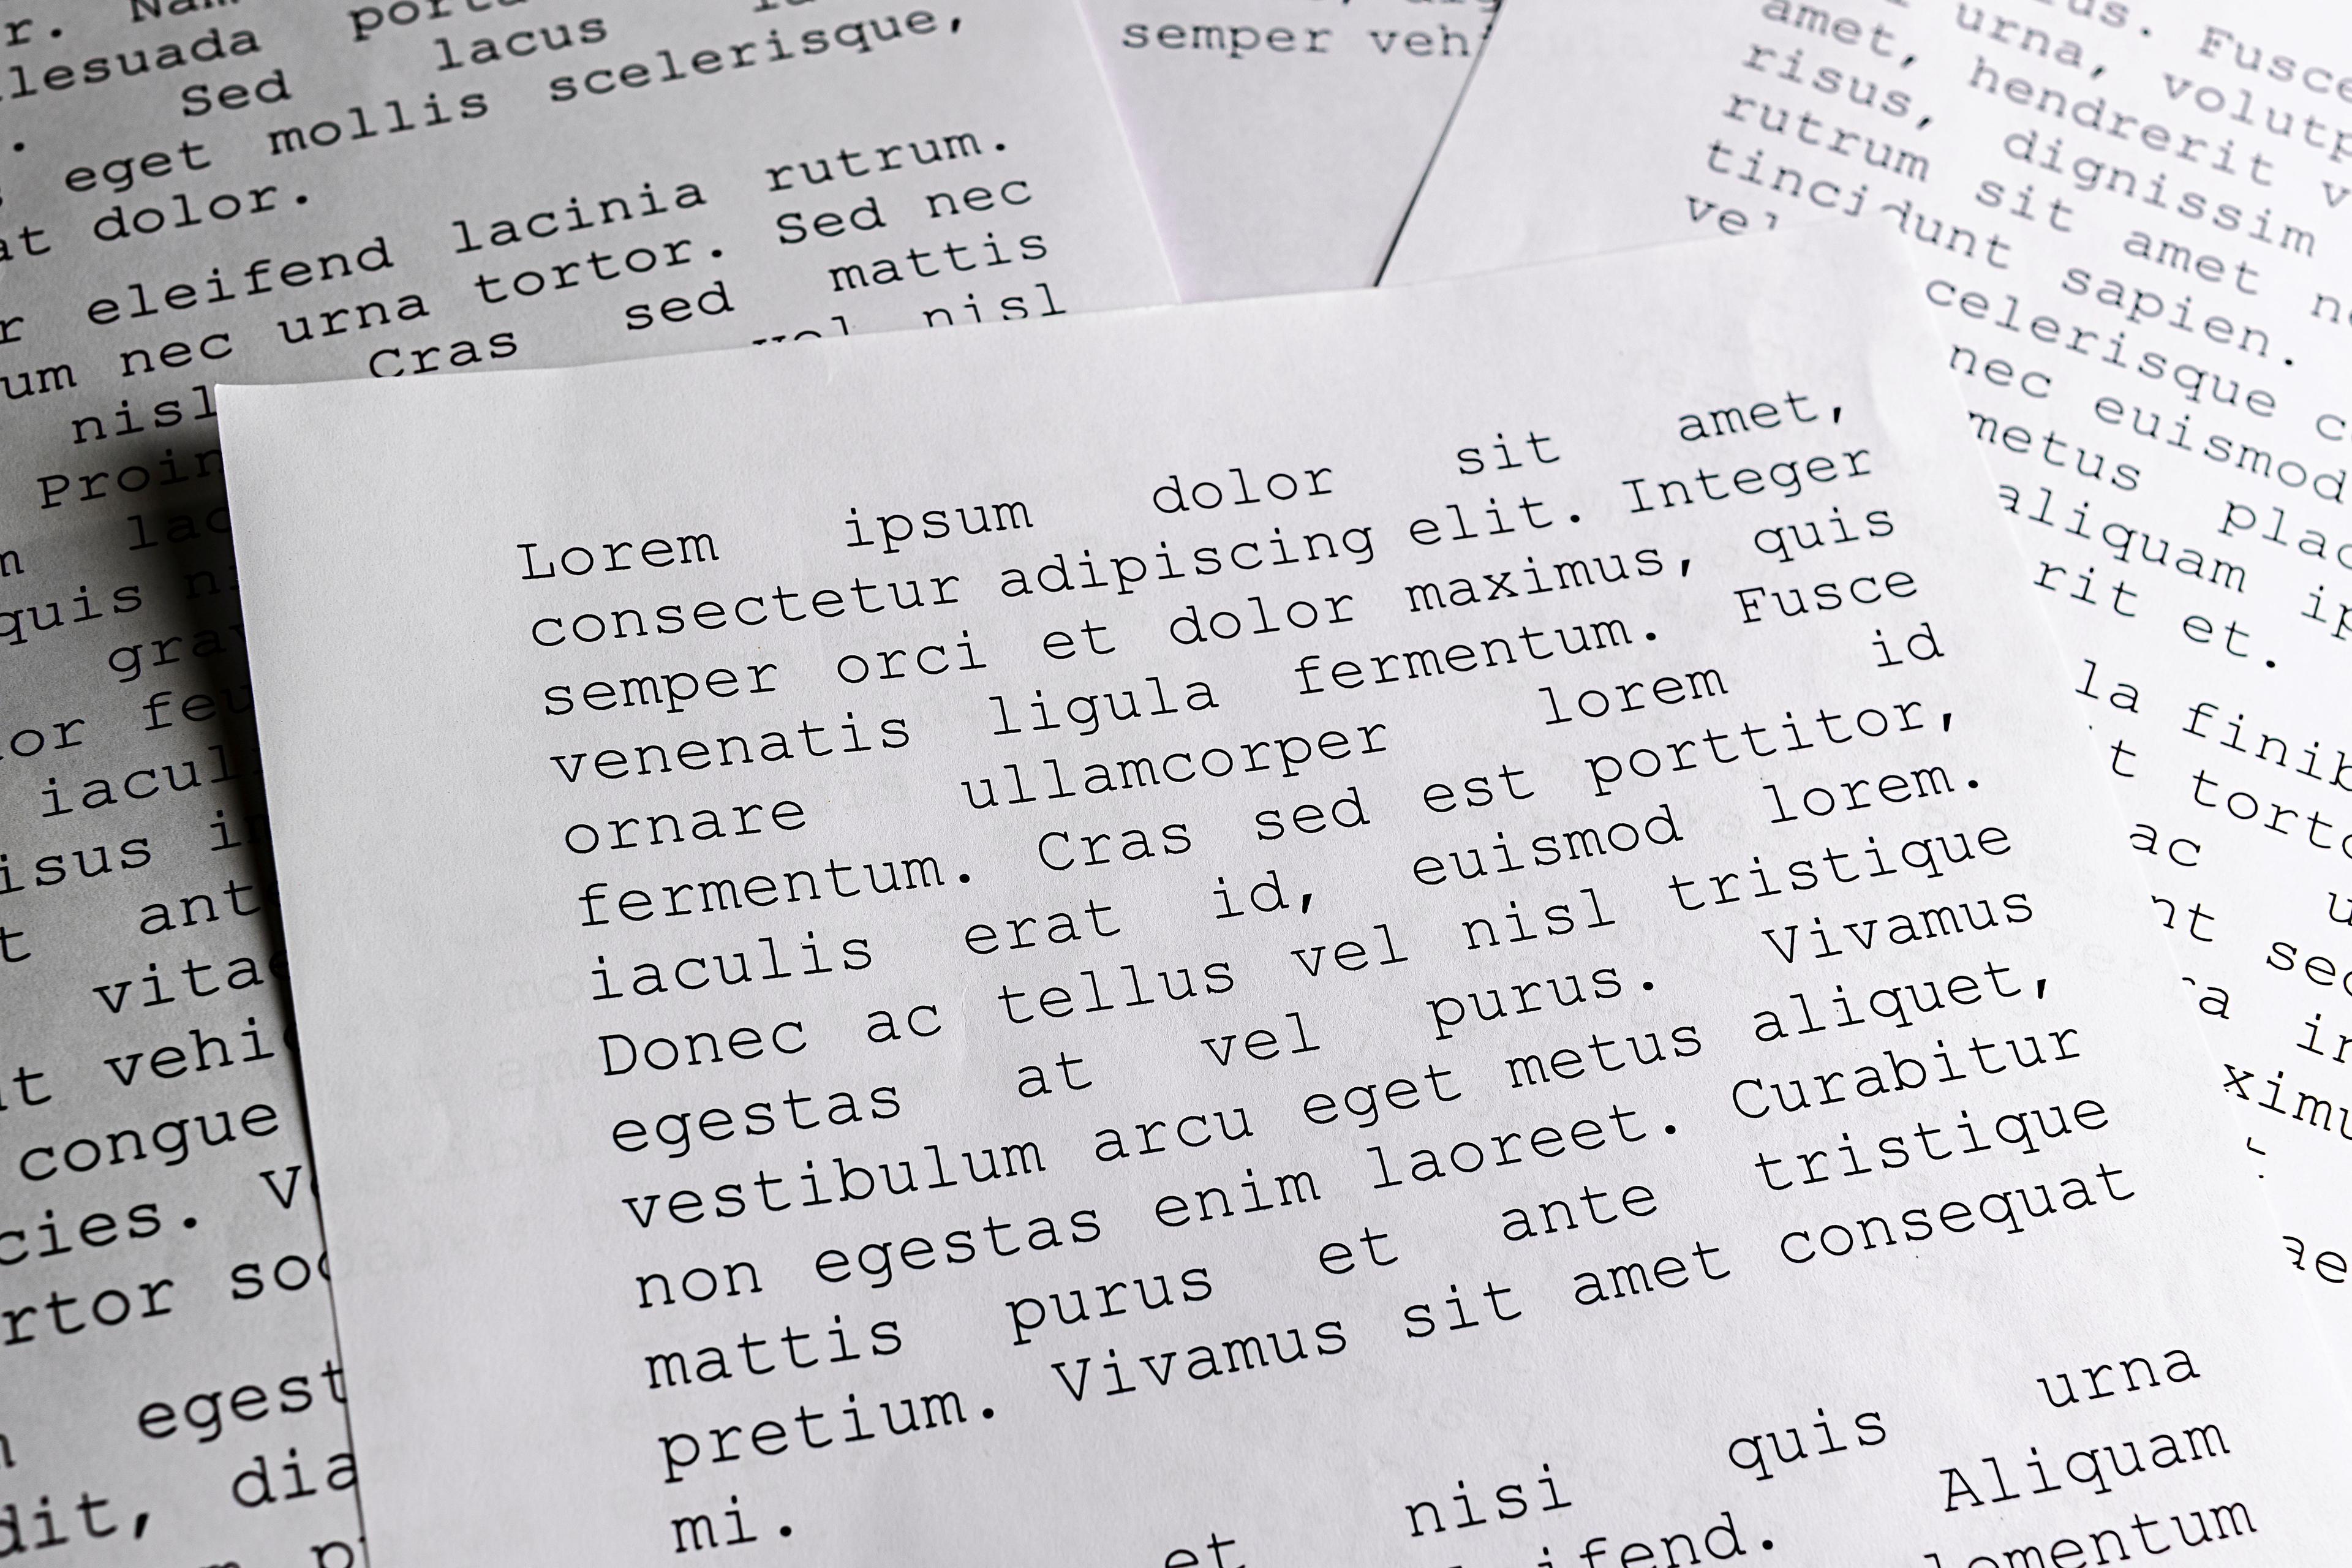 Some piece of papers with the 'Lorum ipsum' text on it.